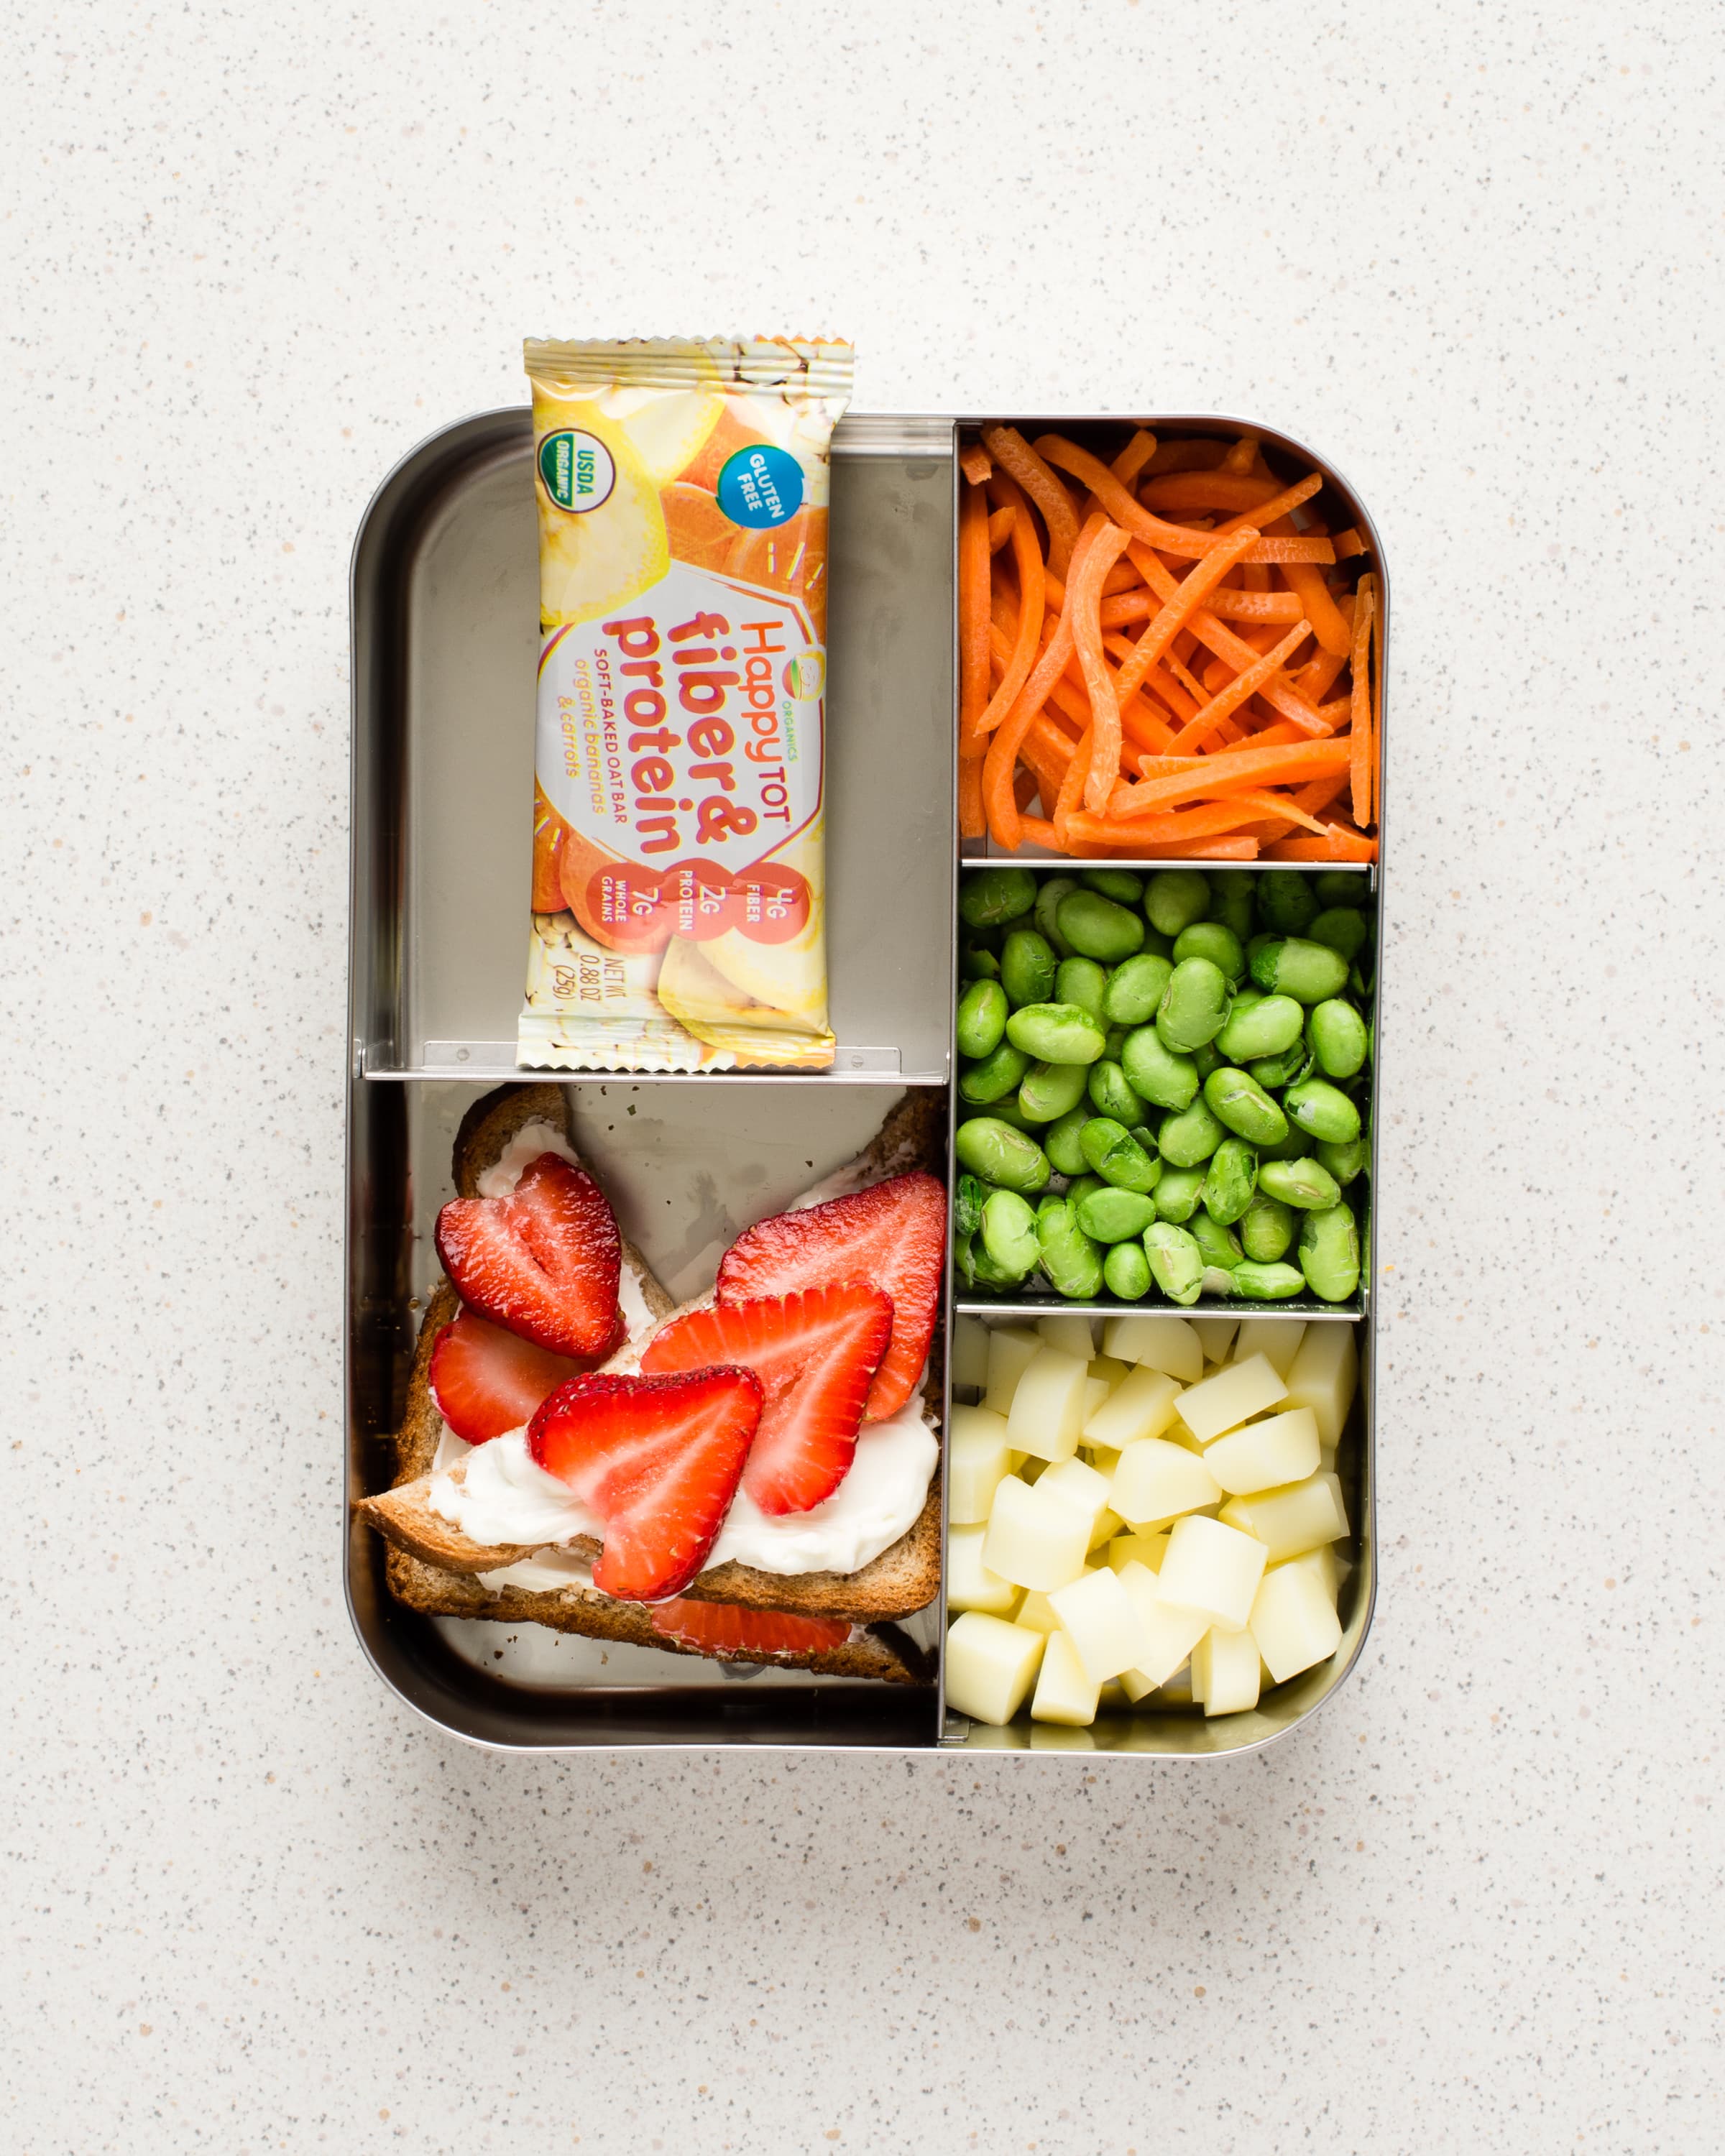 10 Lunch Ideas for Toddlers (Easy & Healthy)